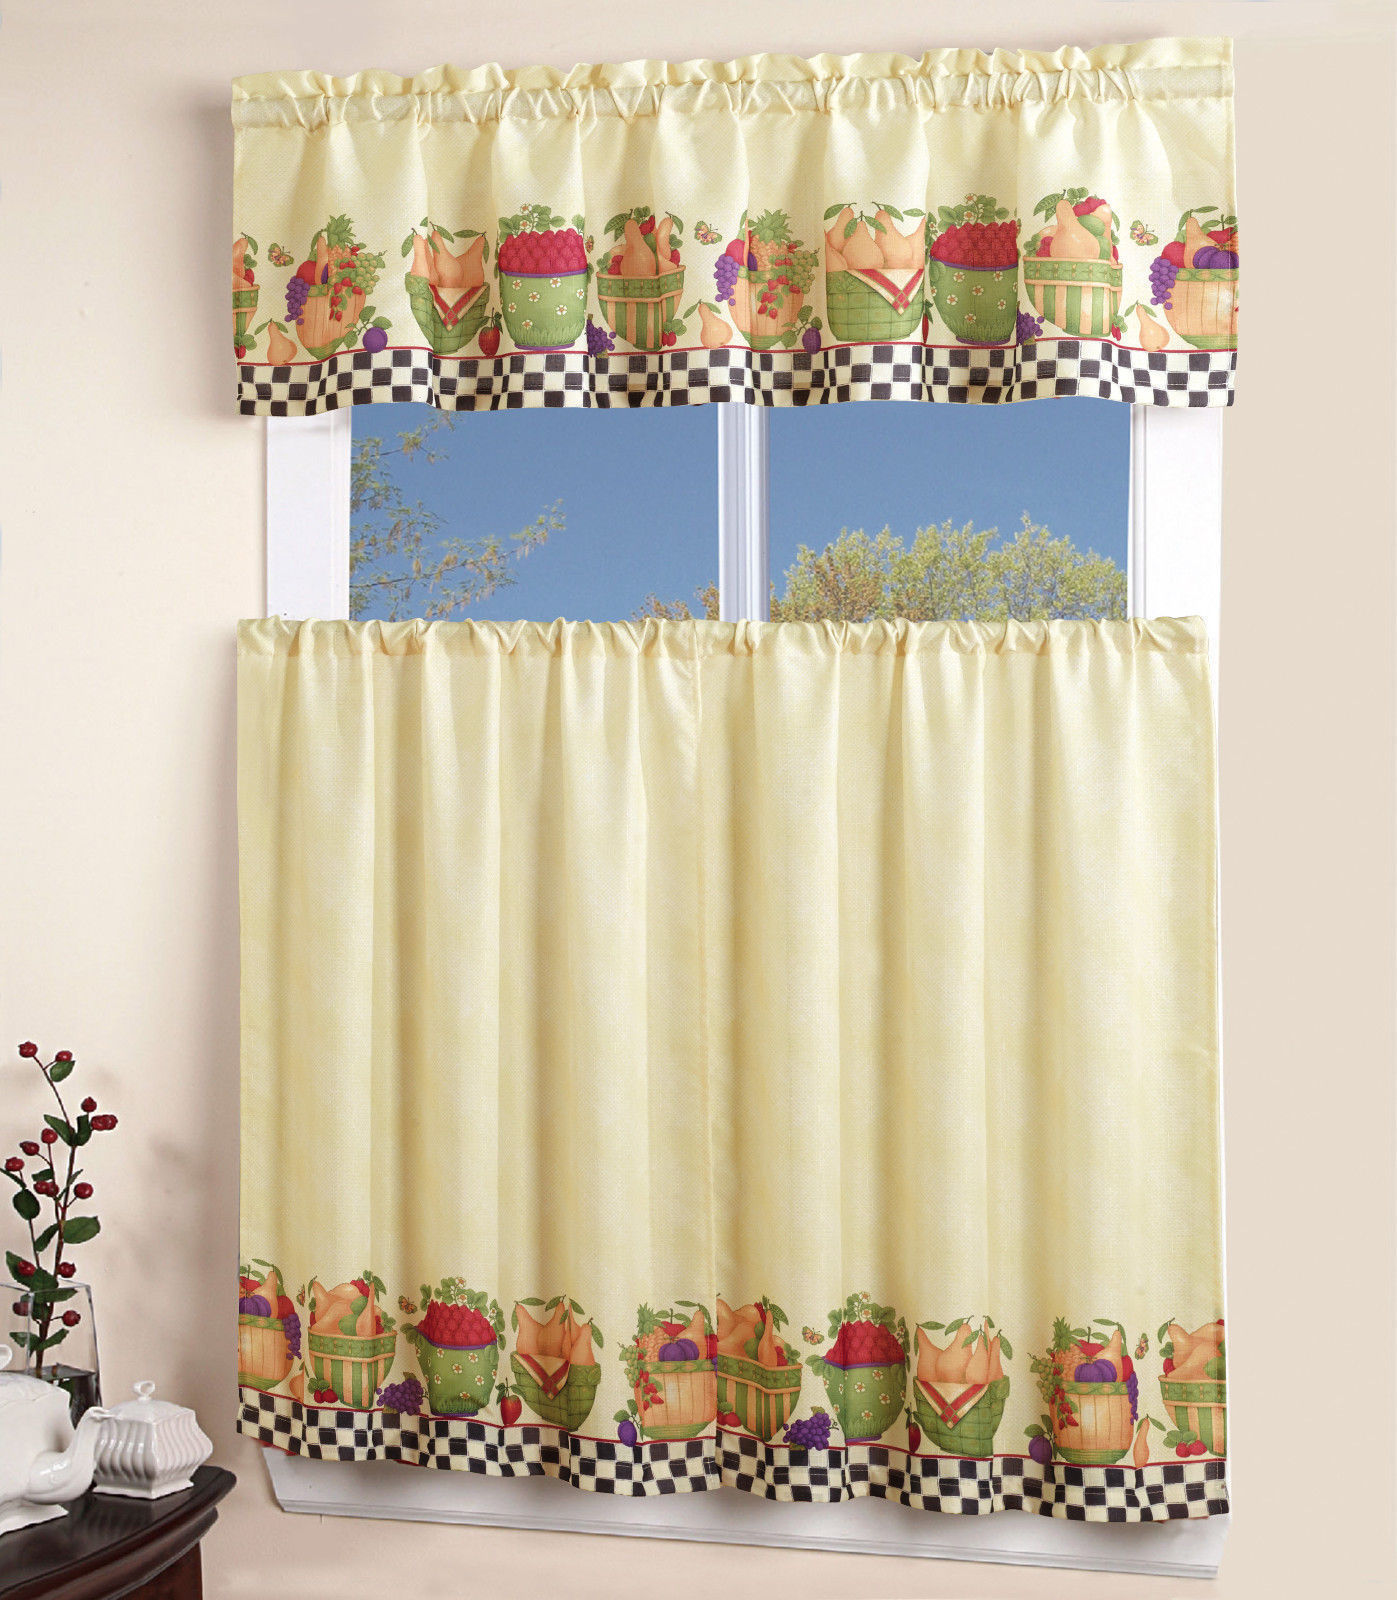 Primary image for 3PC ROD POCKET KITCHEN WINDOW CURTAIN 2 TIERS + 1 TAILORED VALANCE SET - FRUIT